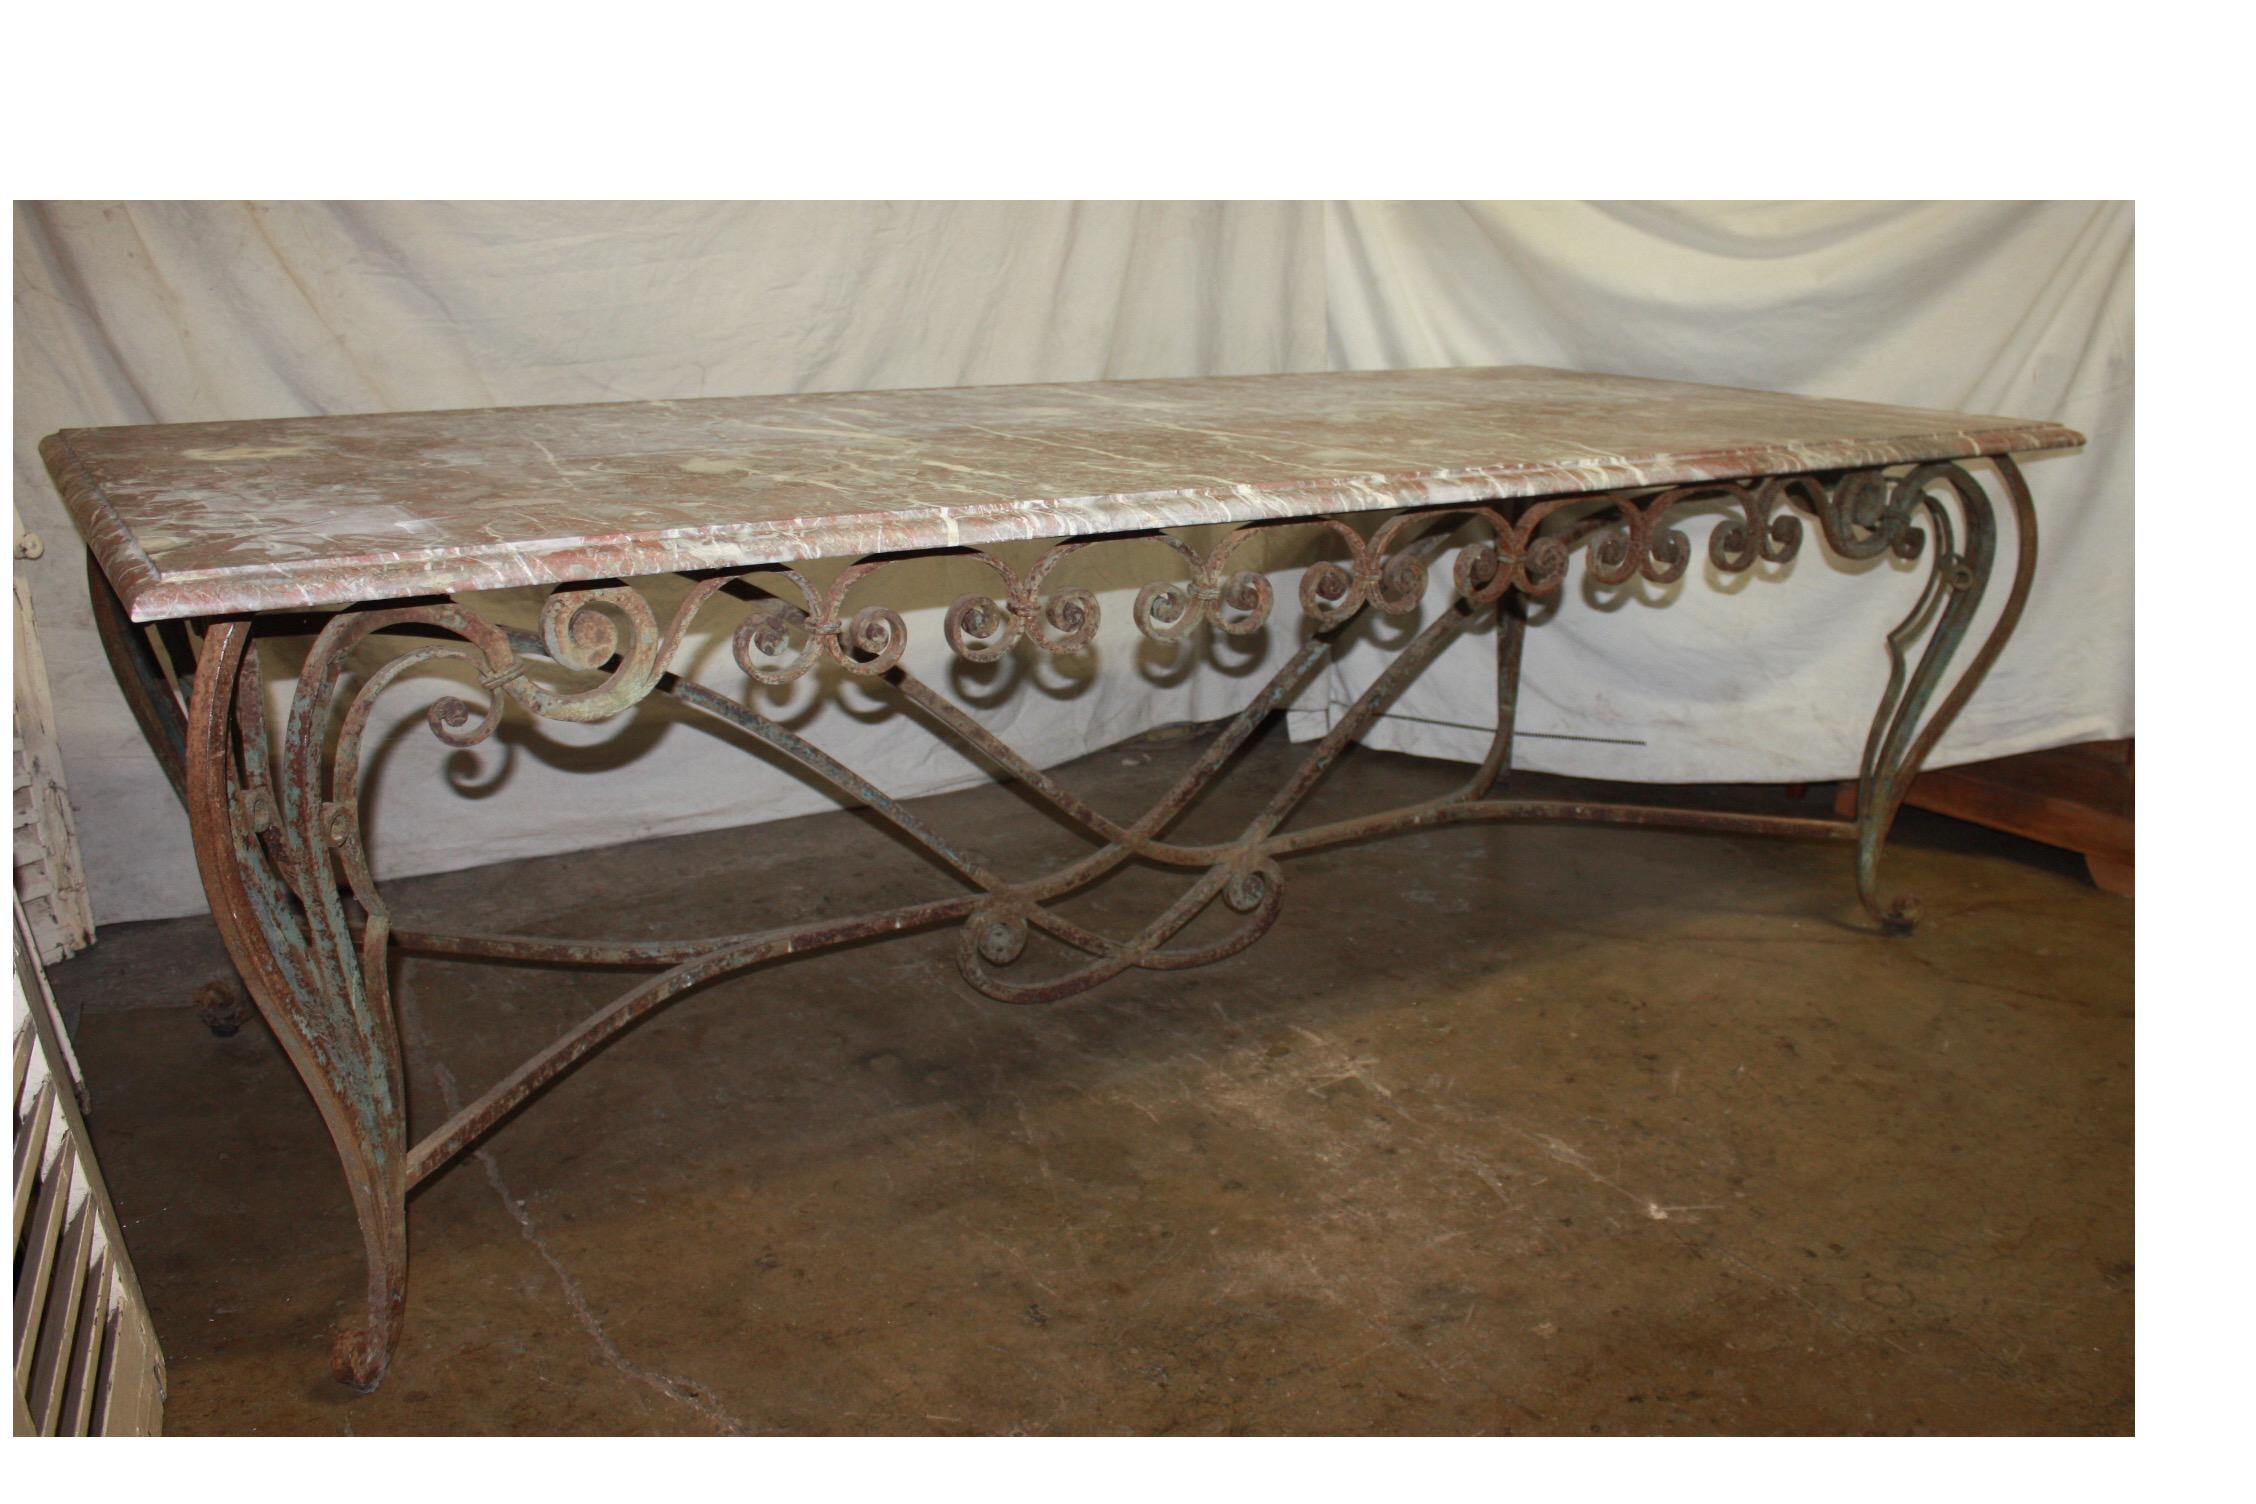 Magnificent 19th century French iron table.